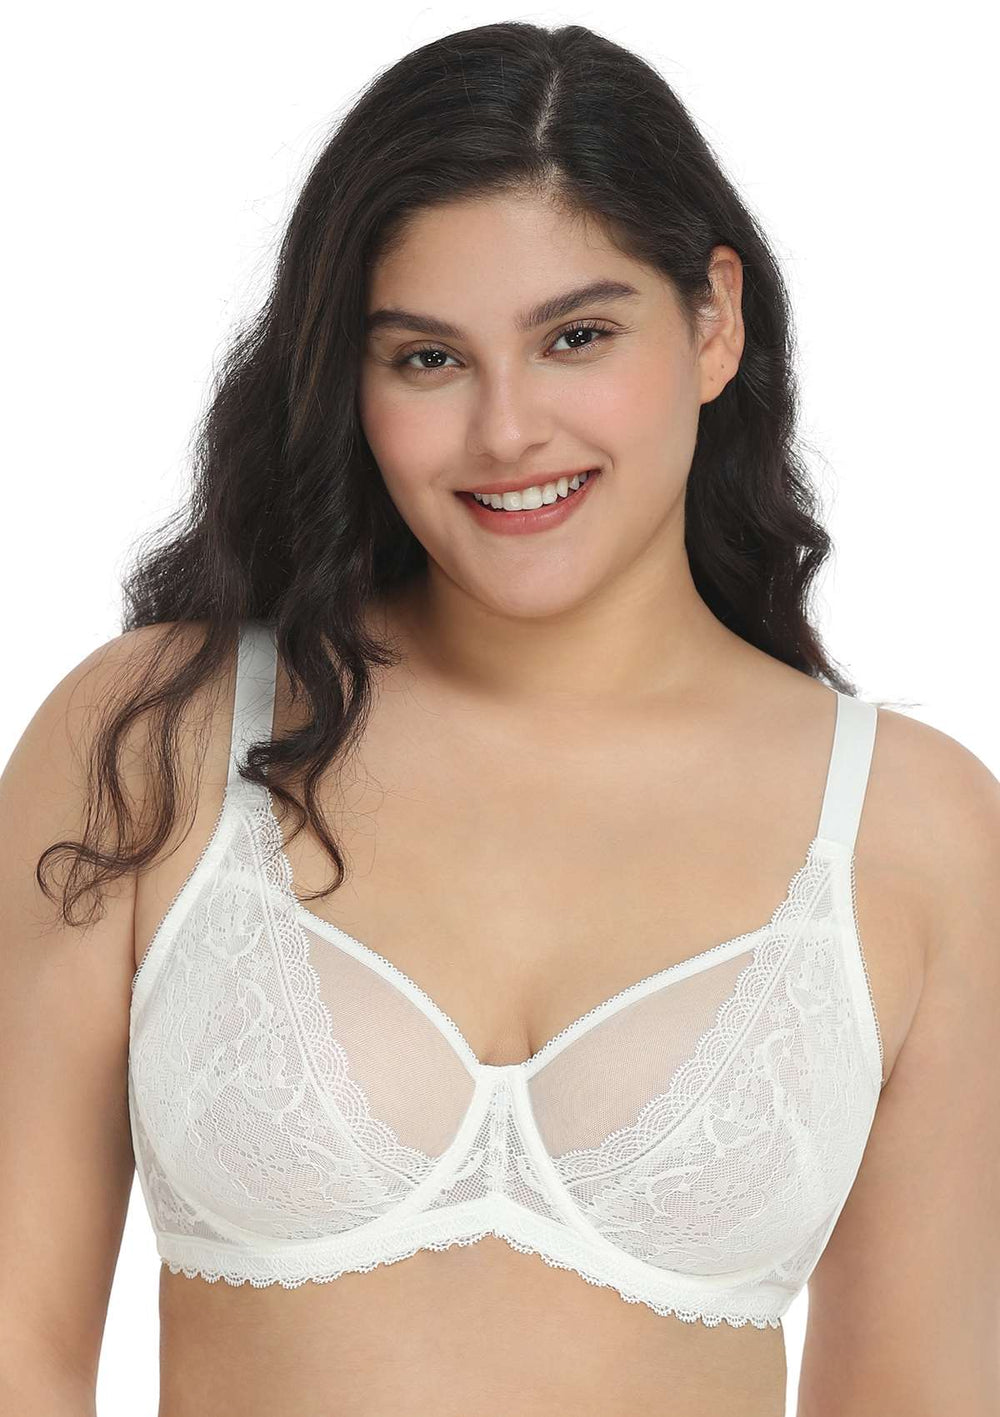 HSIA Anemone Big Bra: Best Bra for Lift and Support, Floral Bra